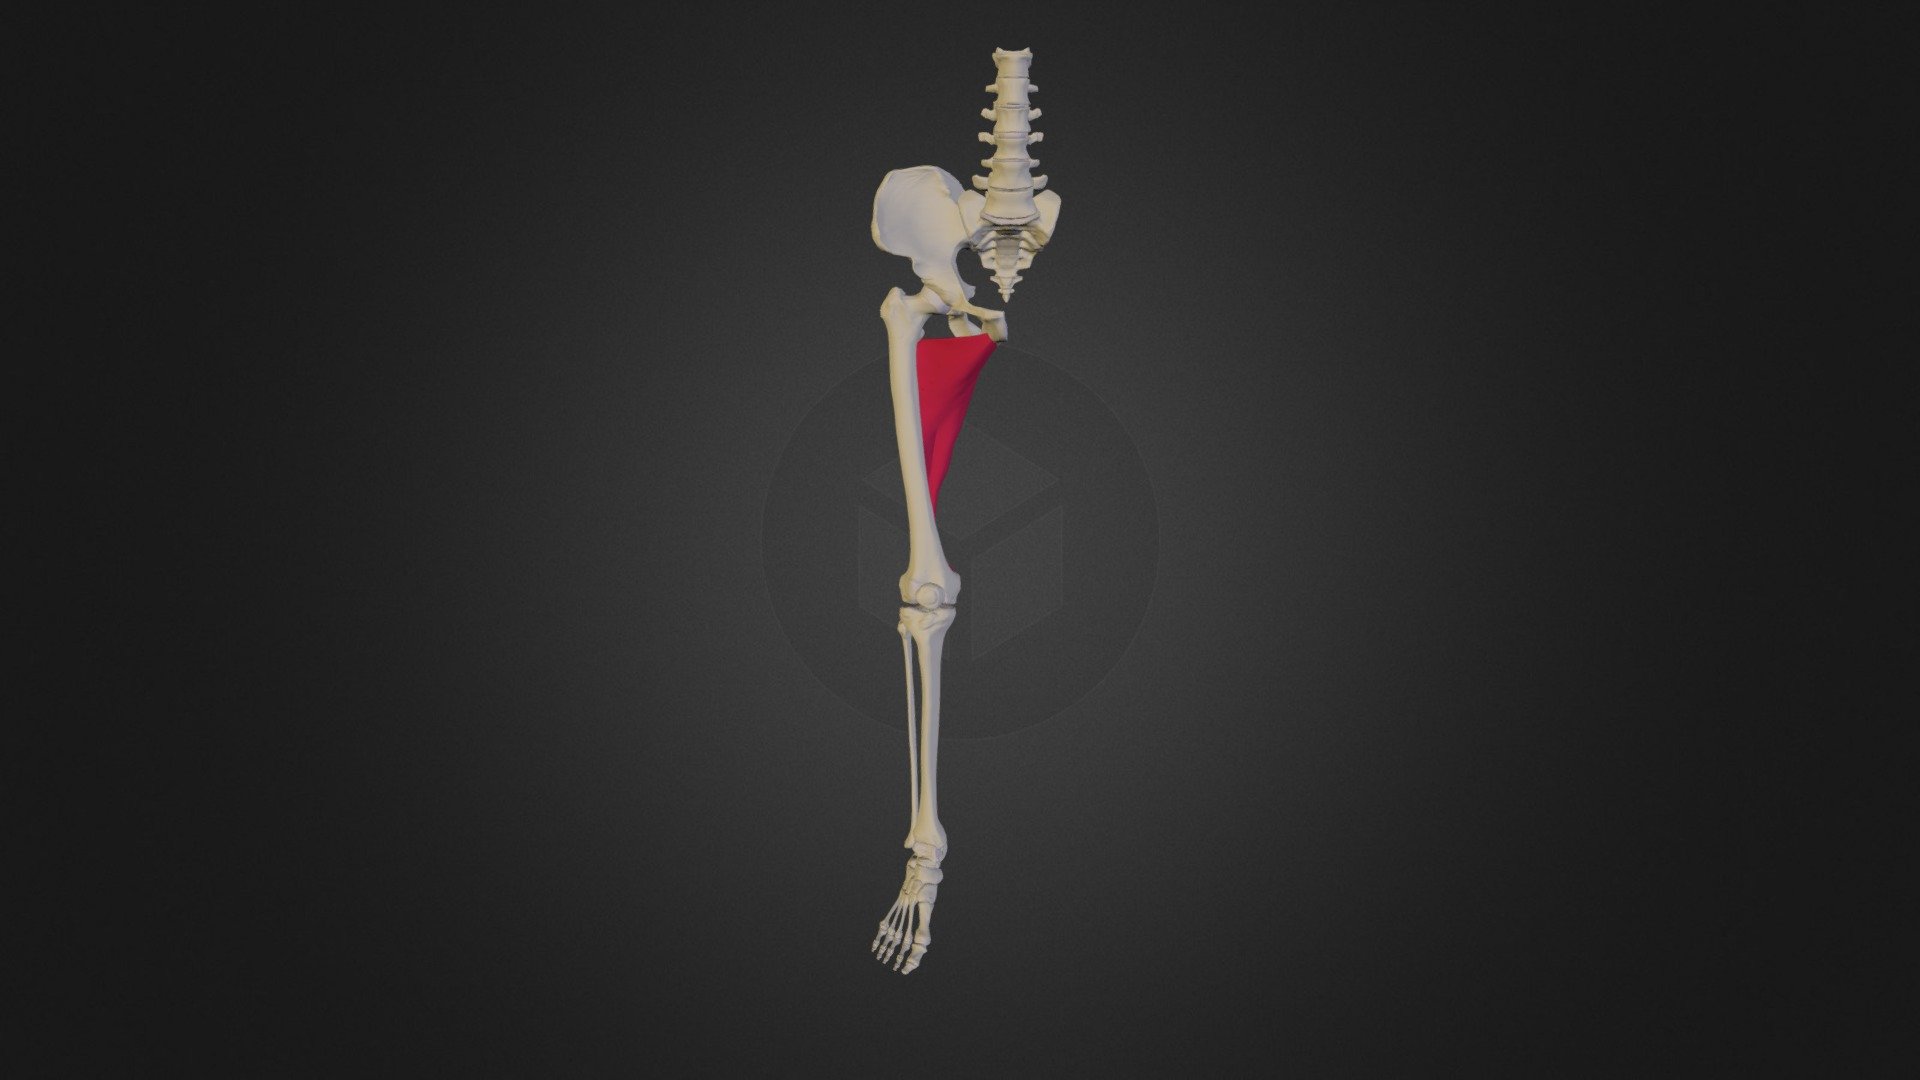 25 Adductor Canal Images, Stock Photos, 3D objects, & Vectors